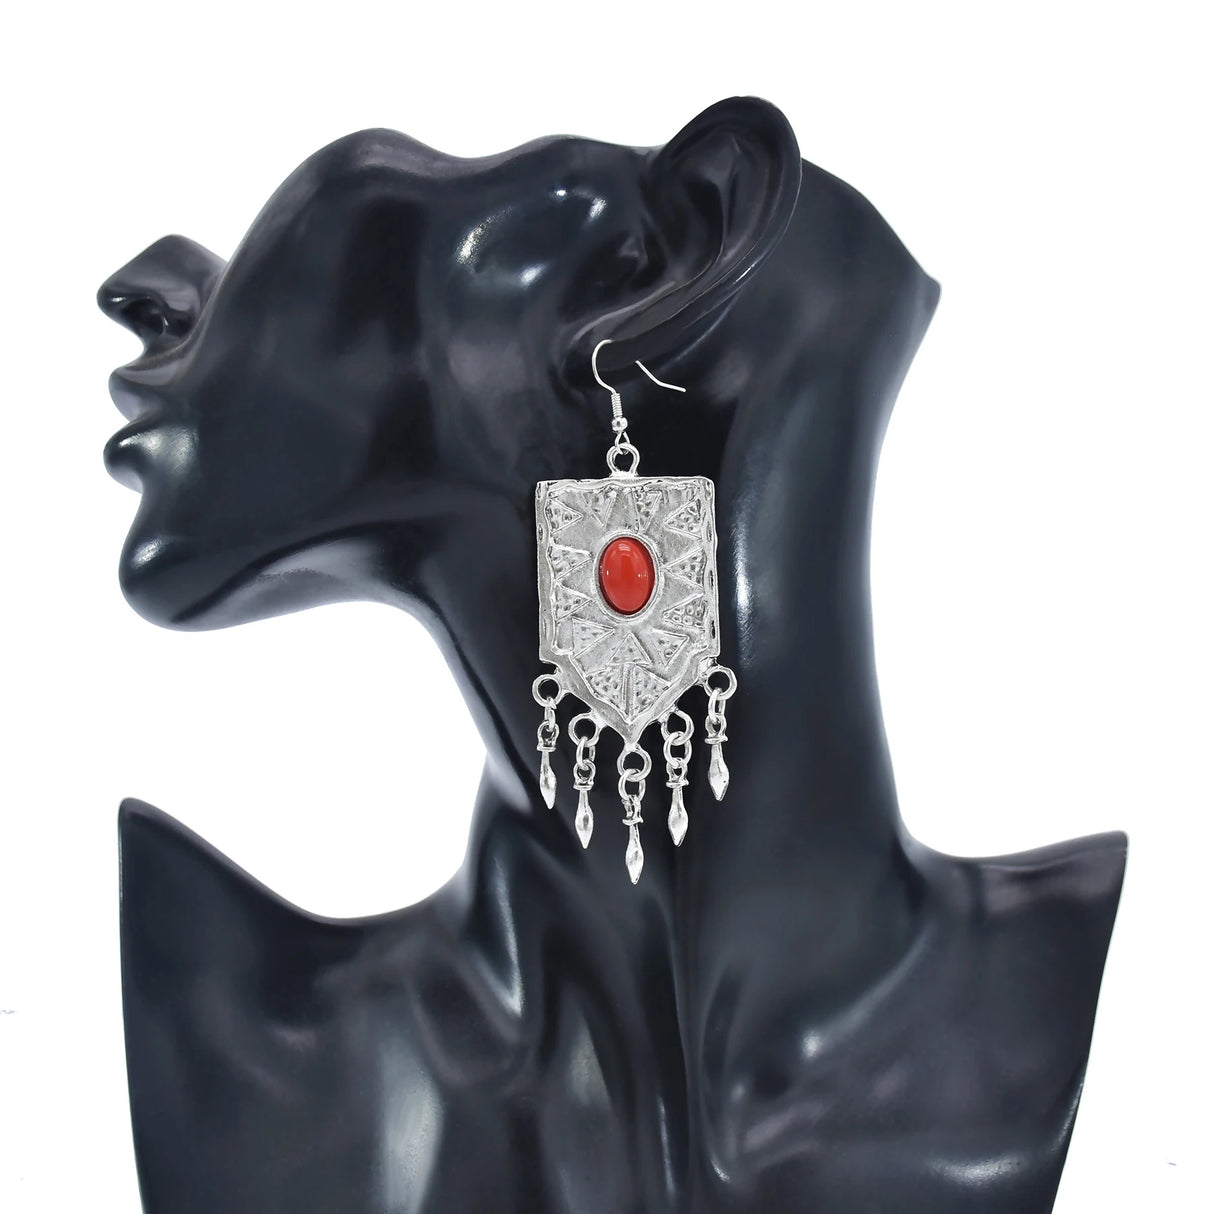 A three-piece bohemian accessory set, silver colored with red stones, a long necklace with four strands, earrings and a bracelet with three rings.